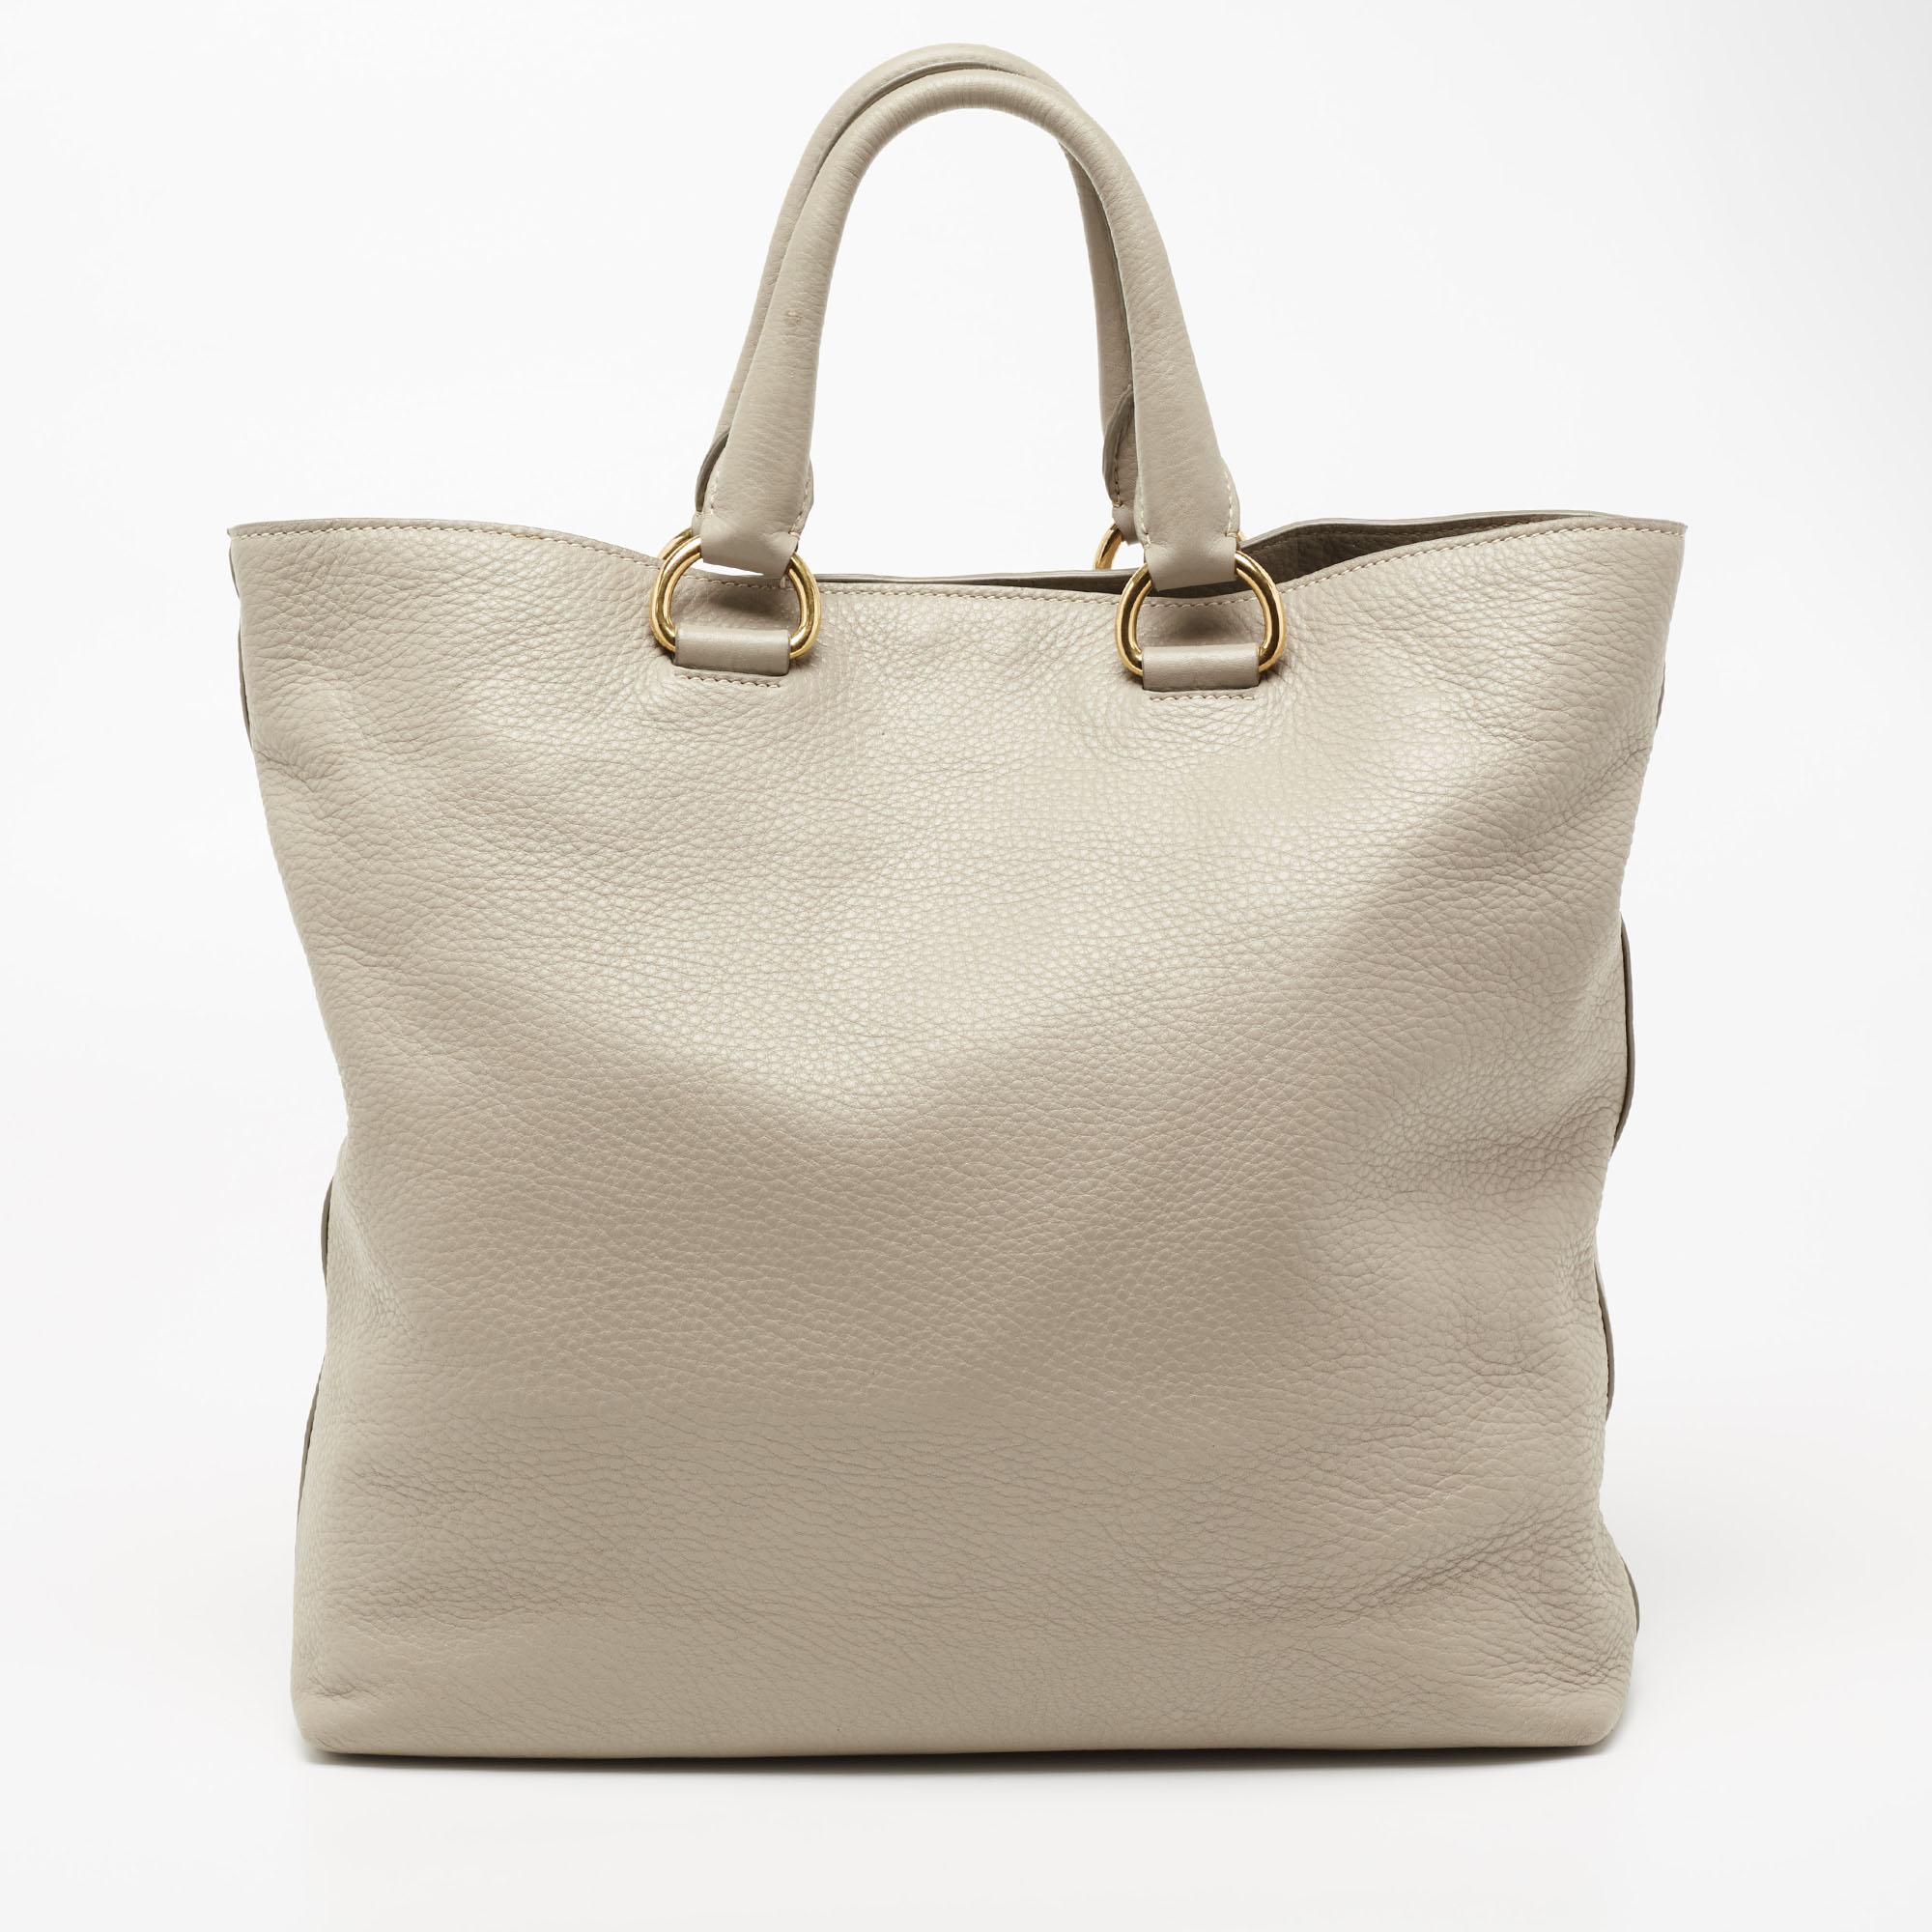 This Shopper tote from the House of Prada is great for everyday use. It is made from grey Vitello Daino leather, which is embellished with gold-tone hardware. It showcases dual handles and is provided with a nylon-lined interior. This Prada tote